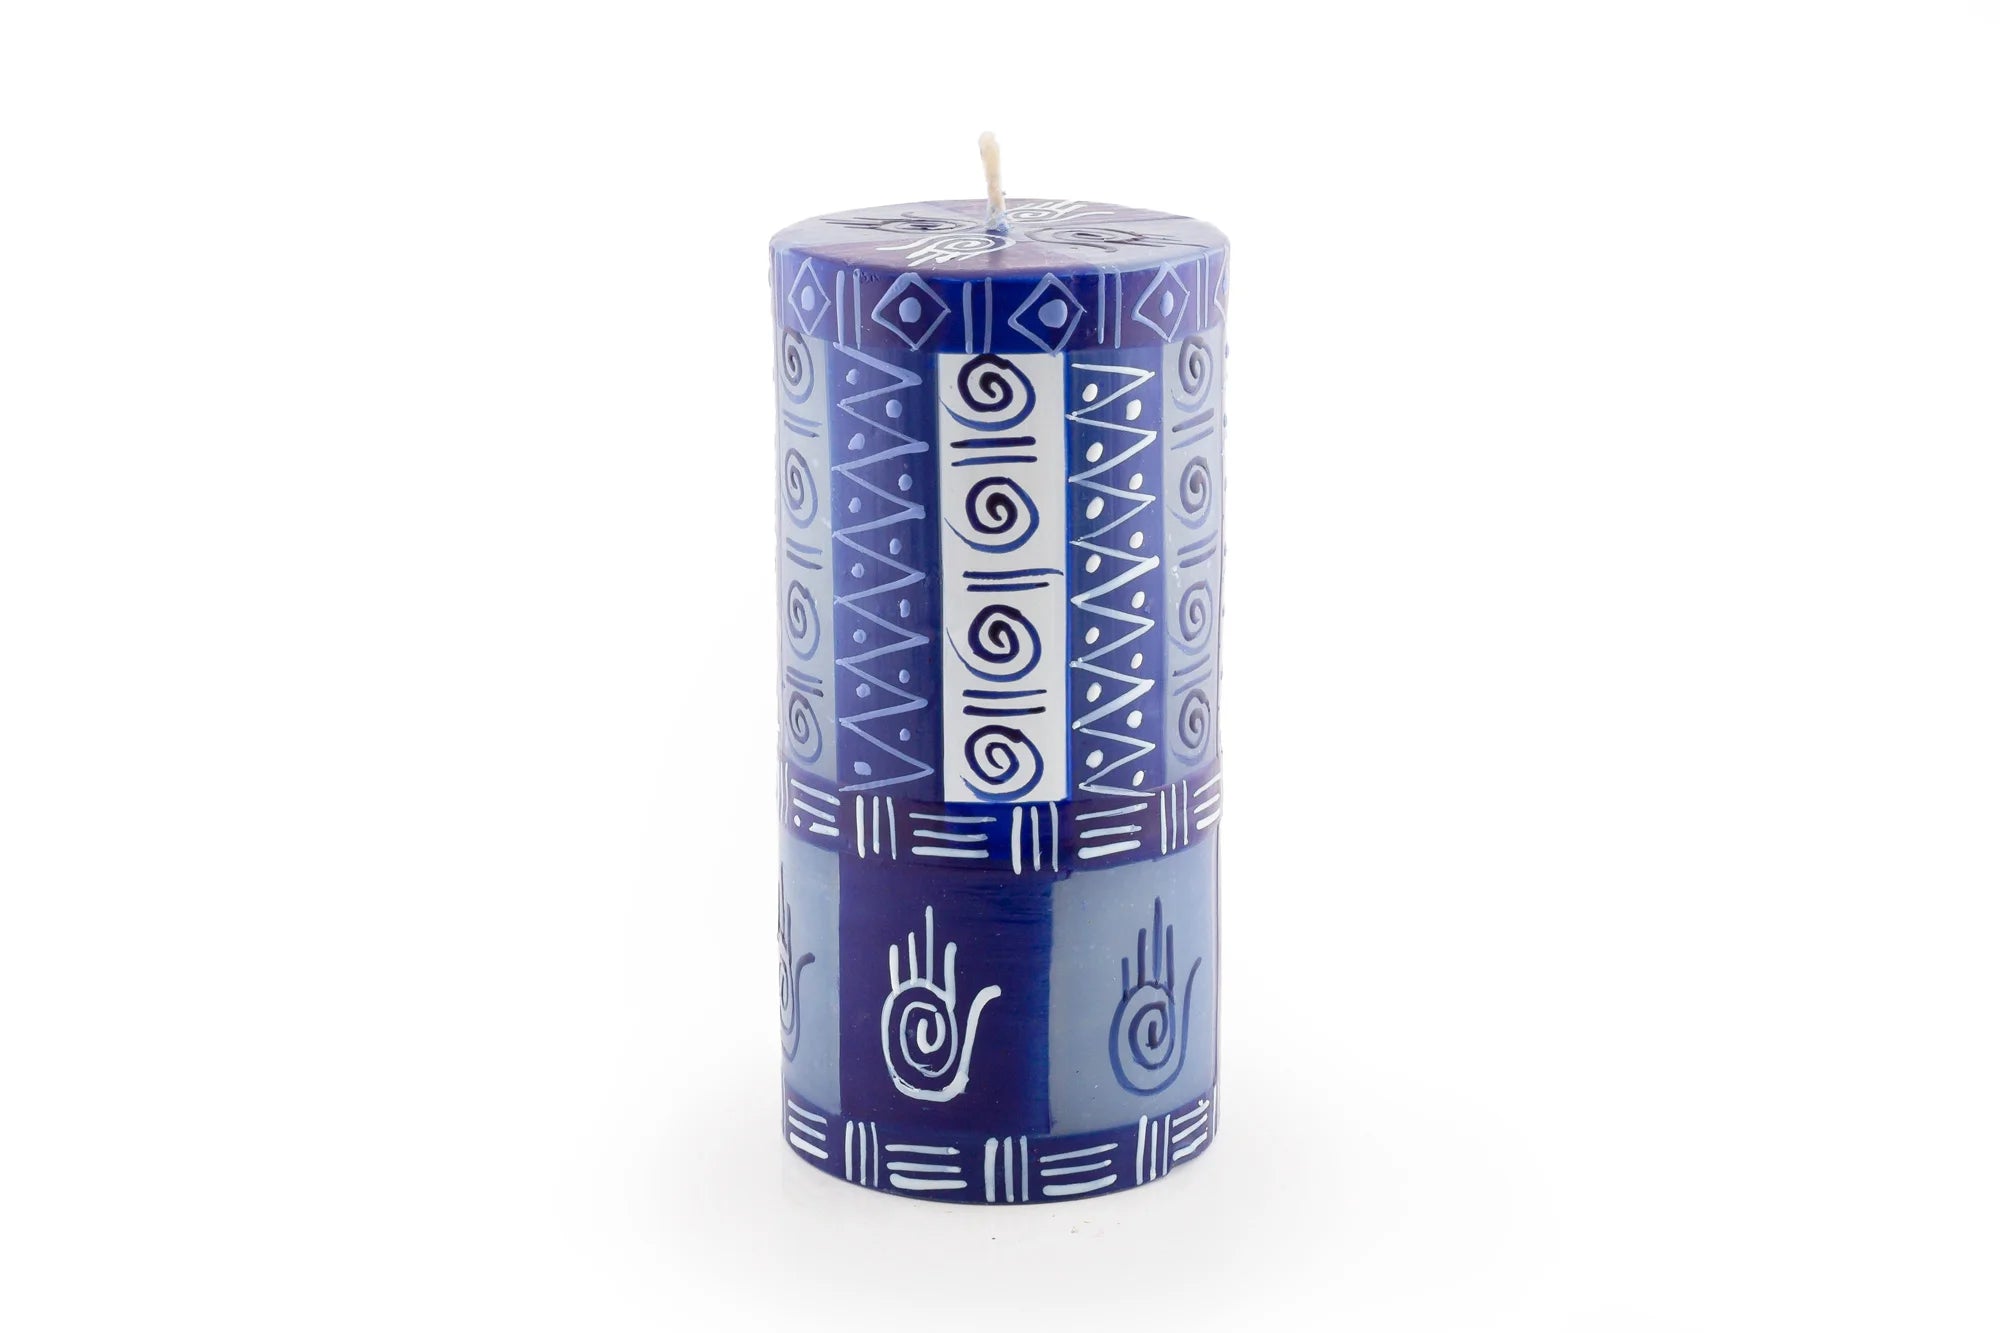 3" x 6" Hamsa pillar painted in blue & white geometric designs with the Hamsa Hand included in the design